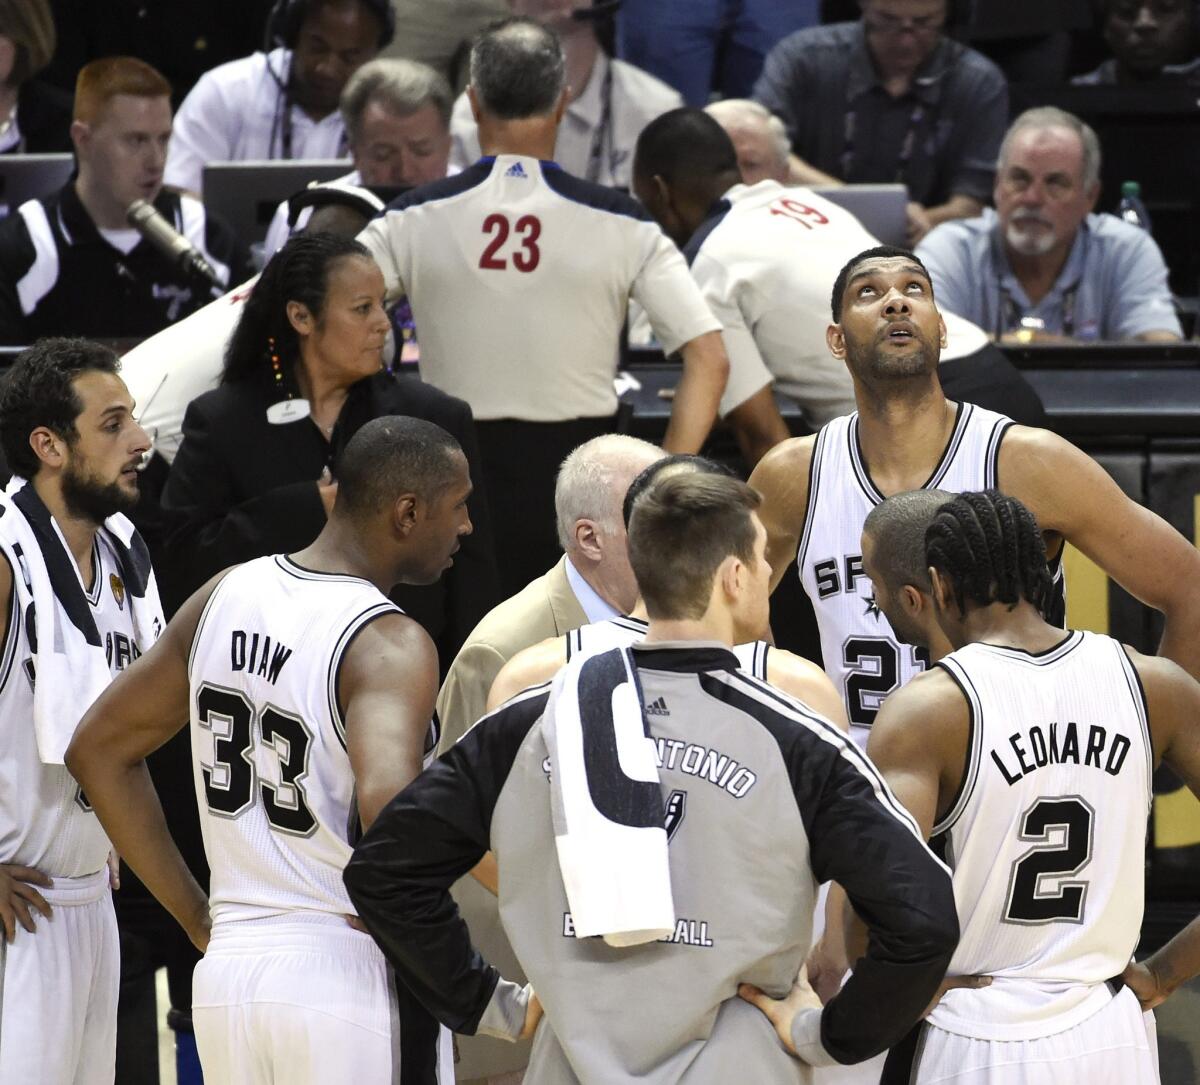 Officials review a play during the second half of Game 2 of the NBA Finals between the Miami Heat and San Antonio Spurs.